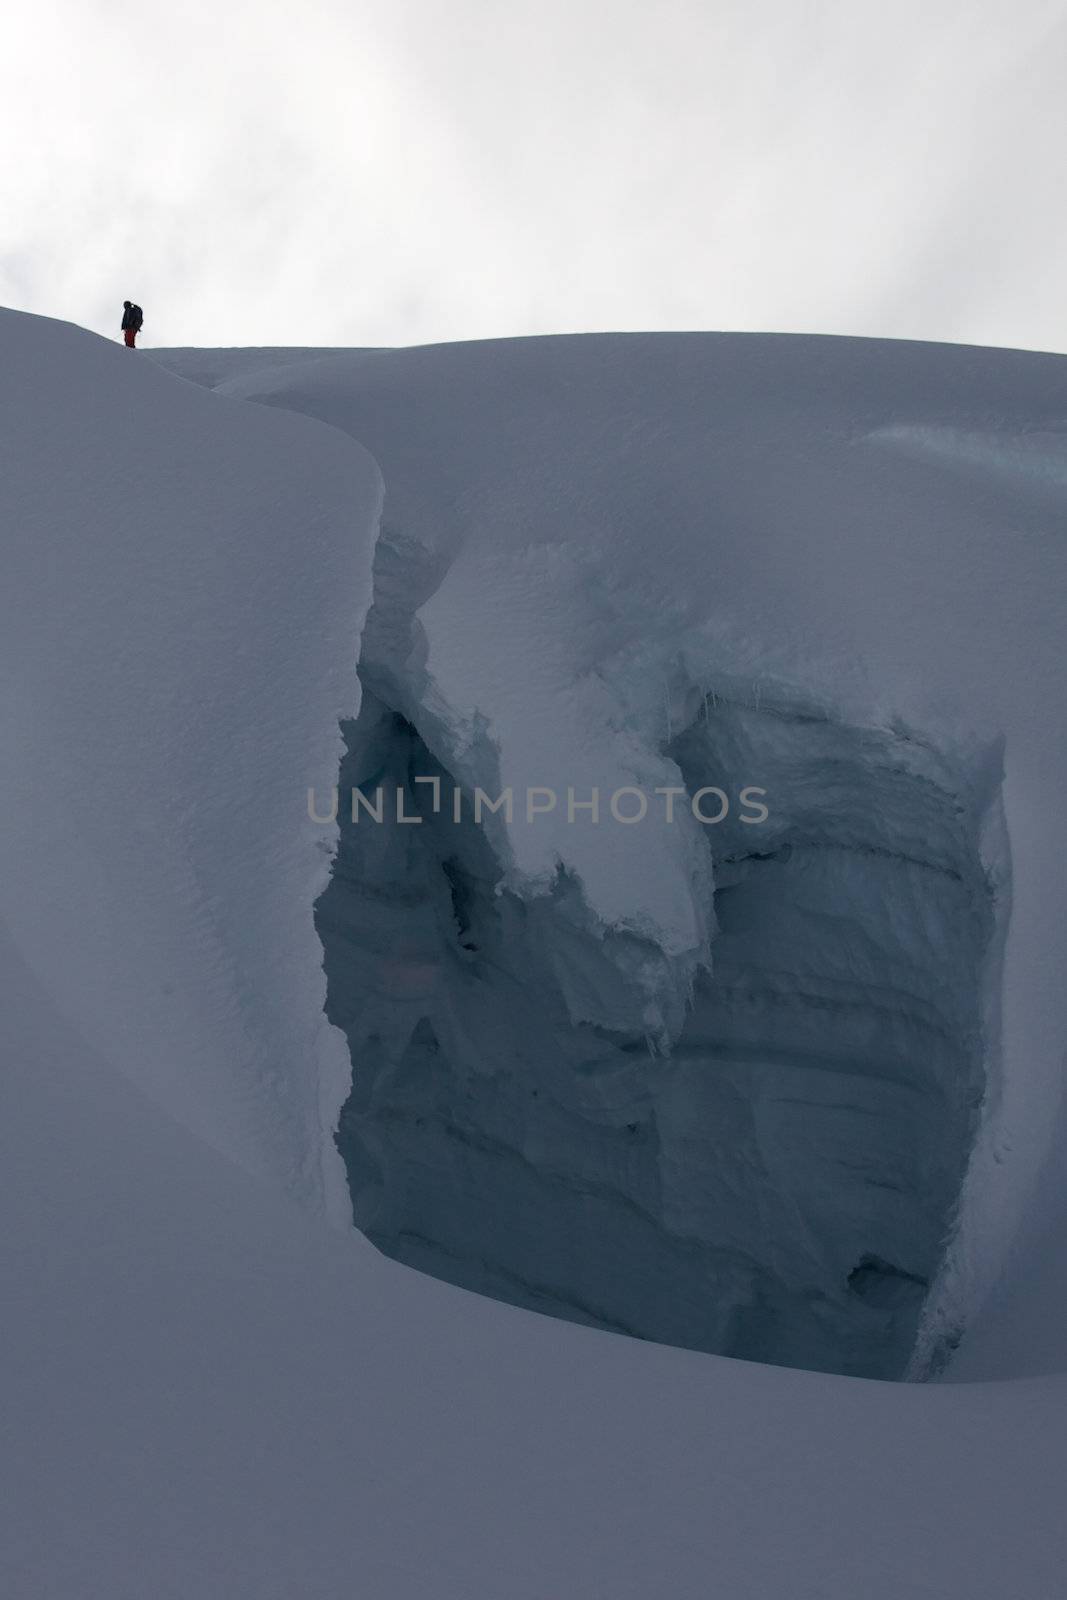 Side view of crevasse with tiny figure of a climber crossing it via a snow bridge